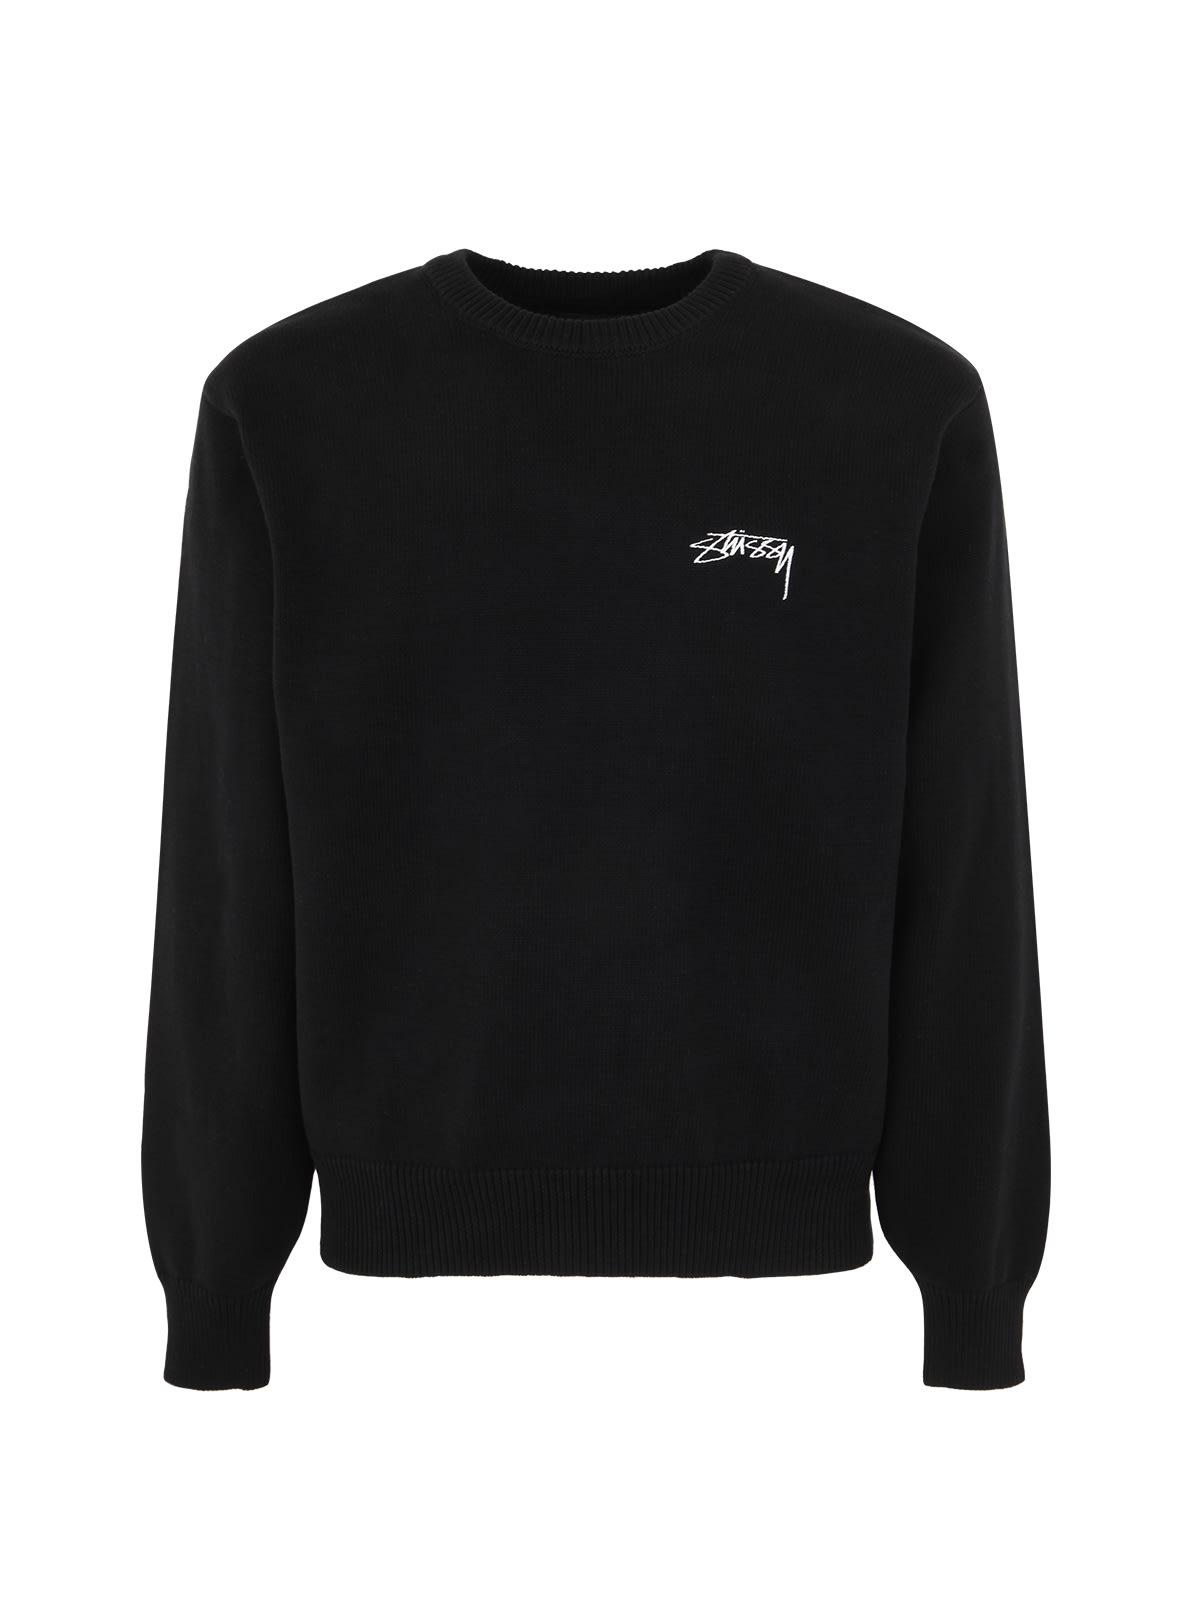 Stussy Cotton Care Label Sweater in Black for Men | Lyst